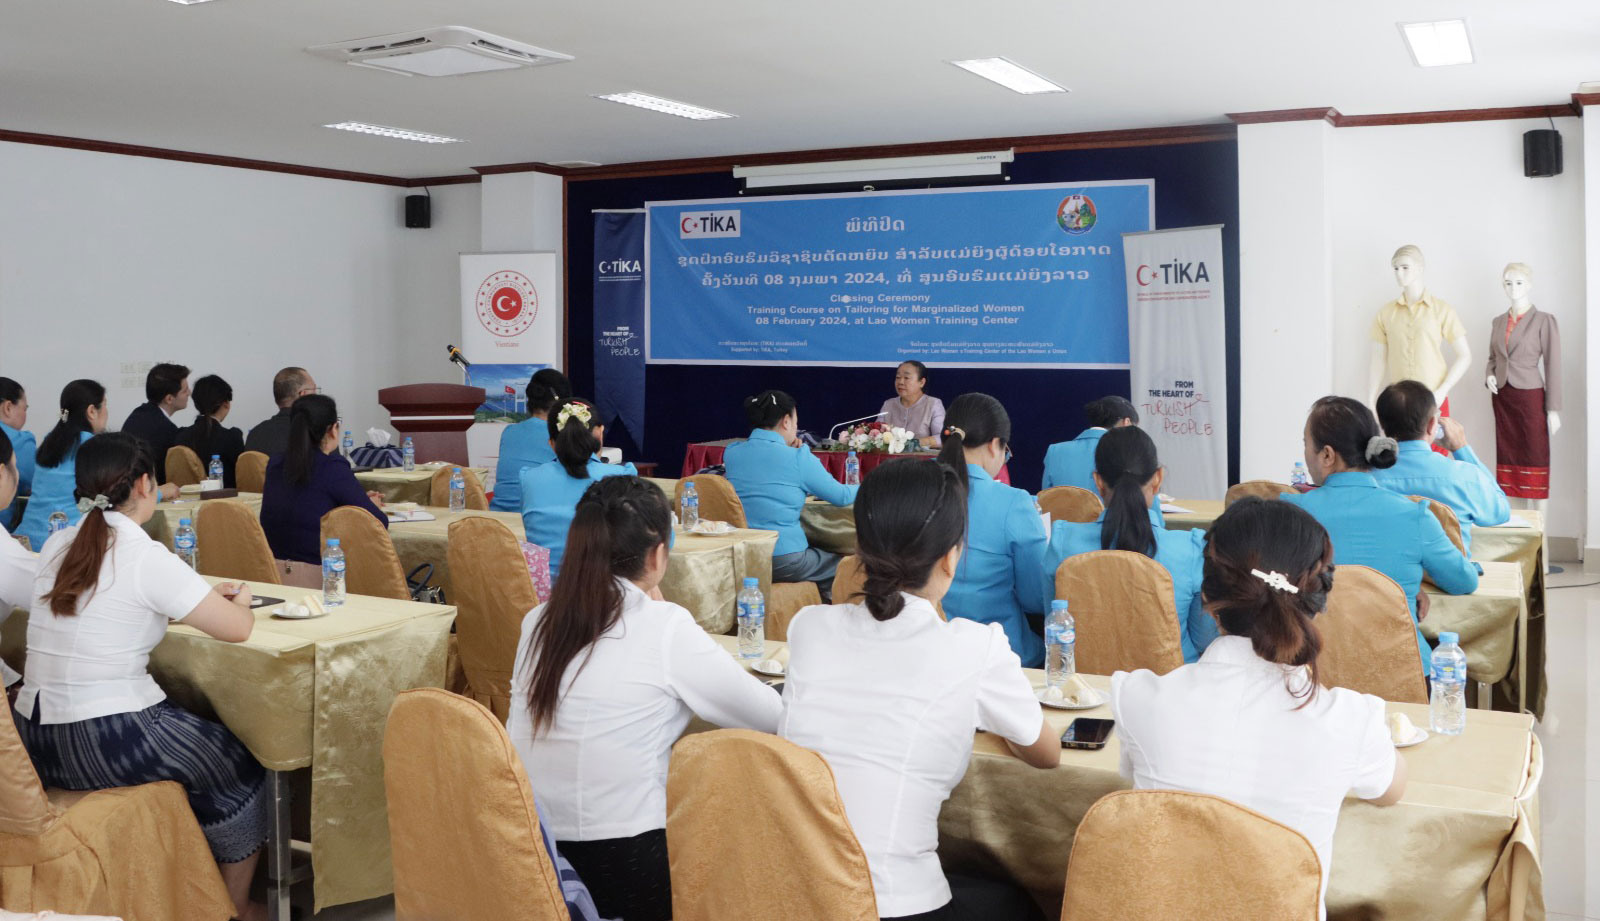 Women’s Employment Opportunities Increase in Laos, Thanks to Training Supported by TİKA